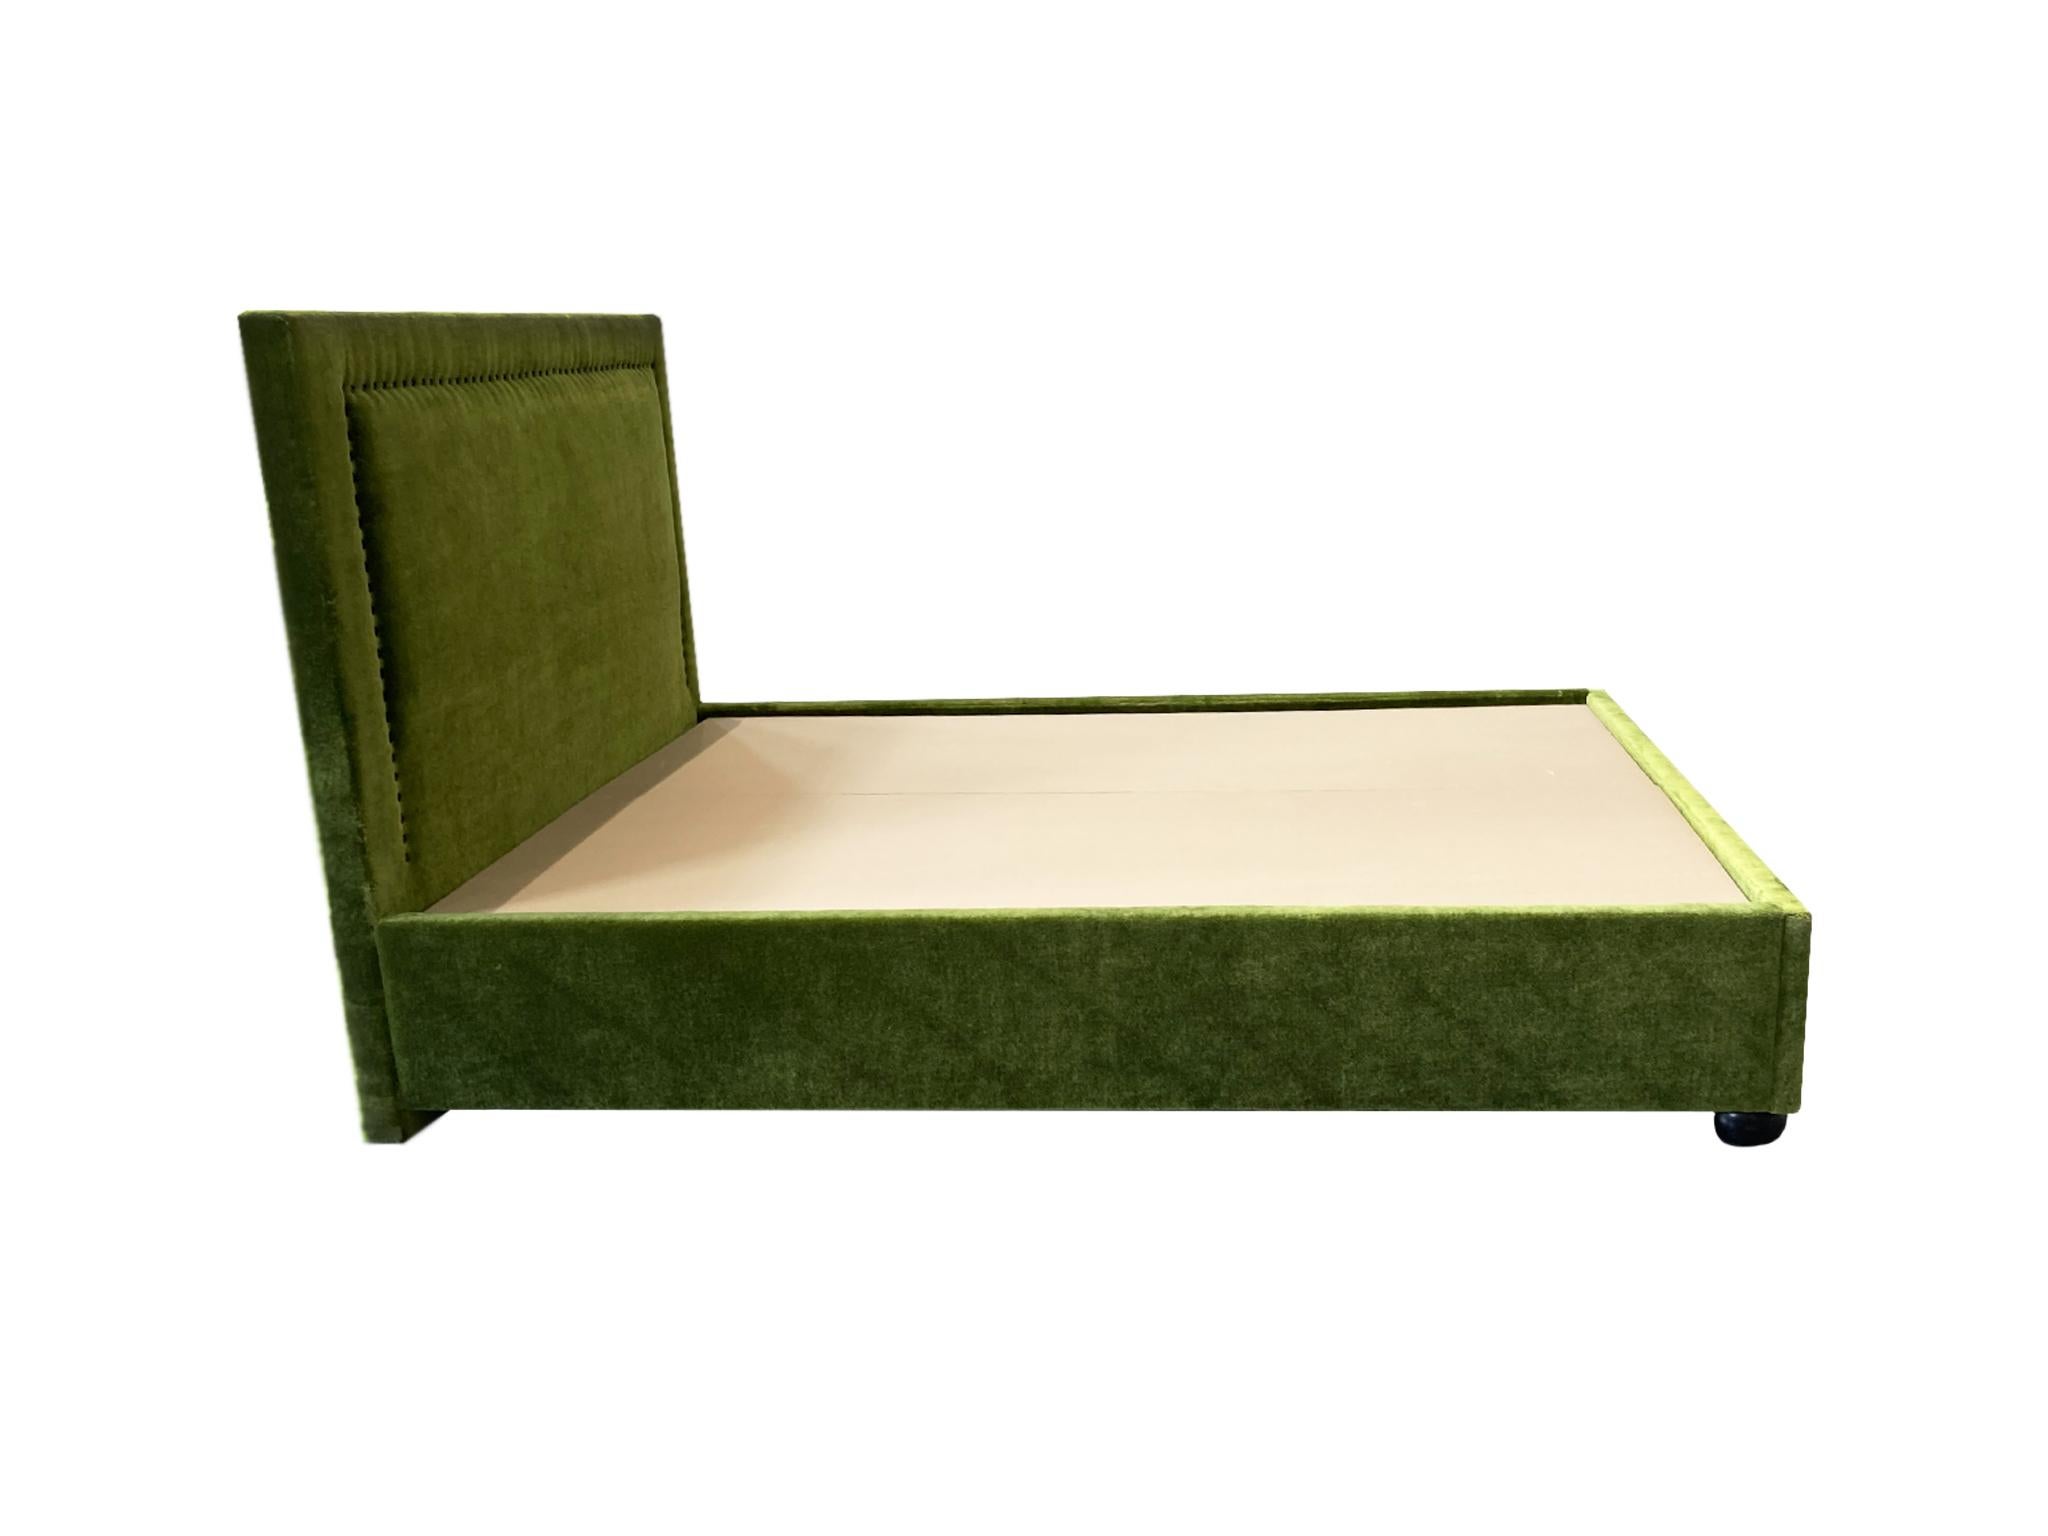 A newly custom-crafted bed-frame for a queen-sized mattress. It is designed in an elegant tuxedo style. The frame consists of 1 headboard, 2 side-rails, and 1 footboard that are all upholstered in a rich moss-green mohair, and 2 fabric-wrapped